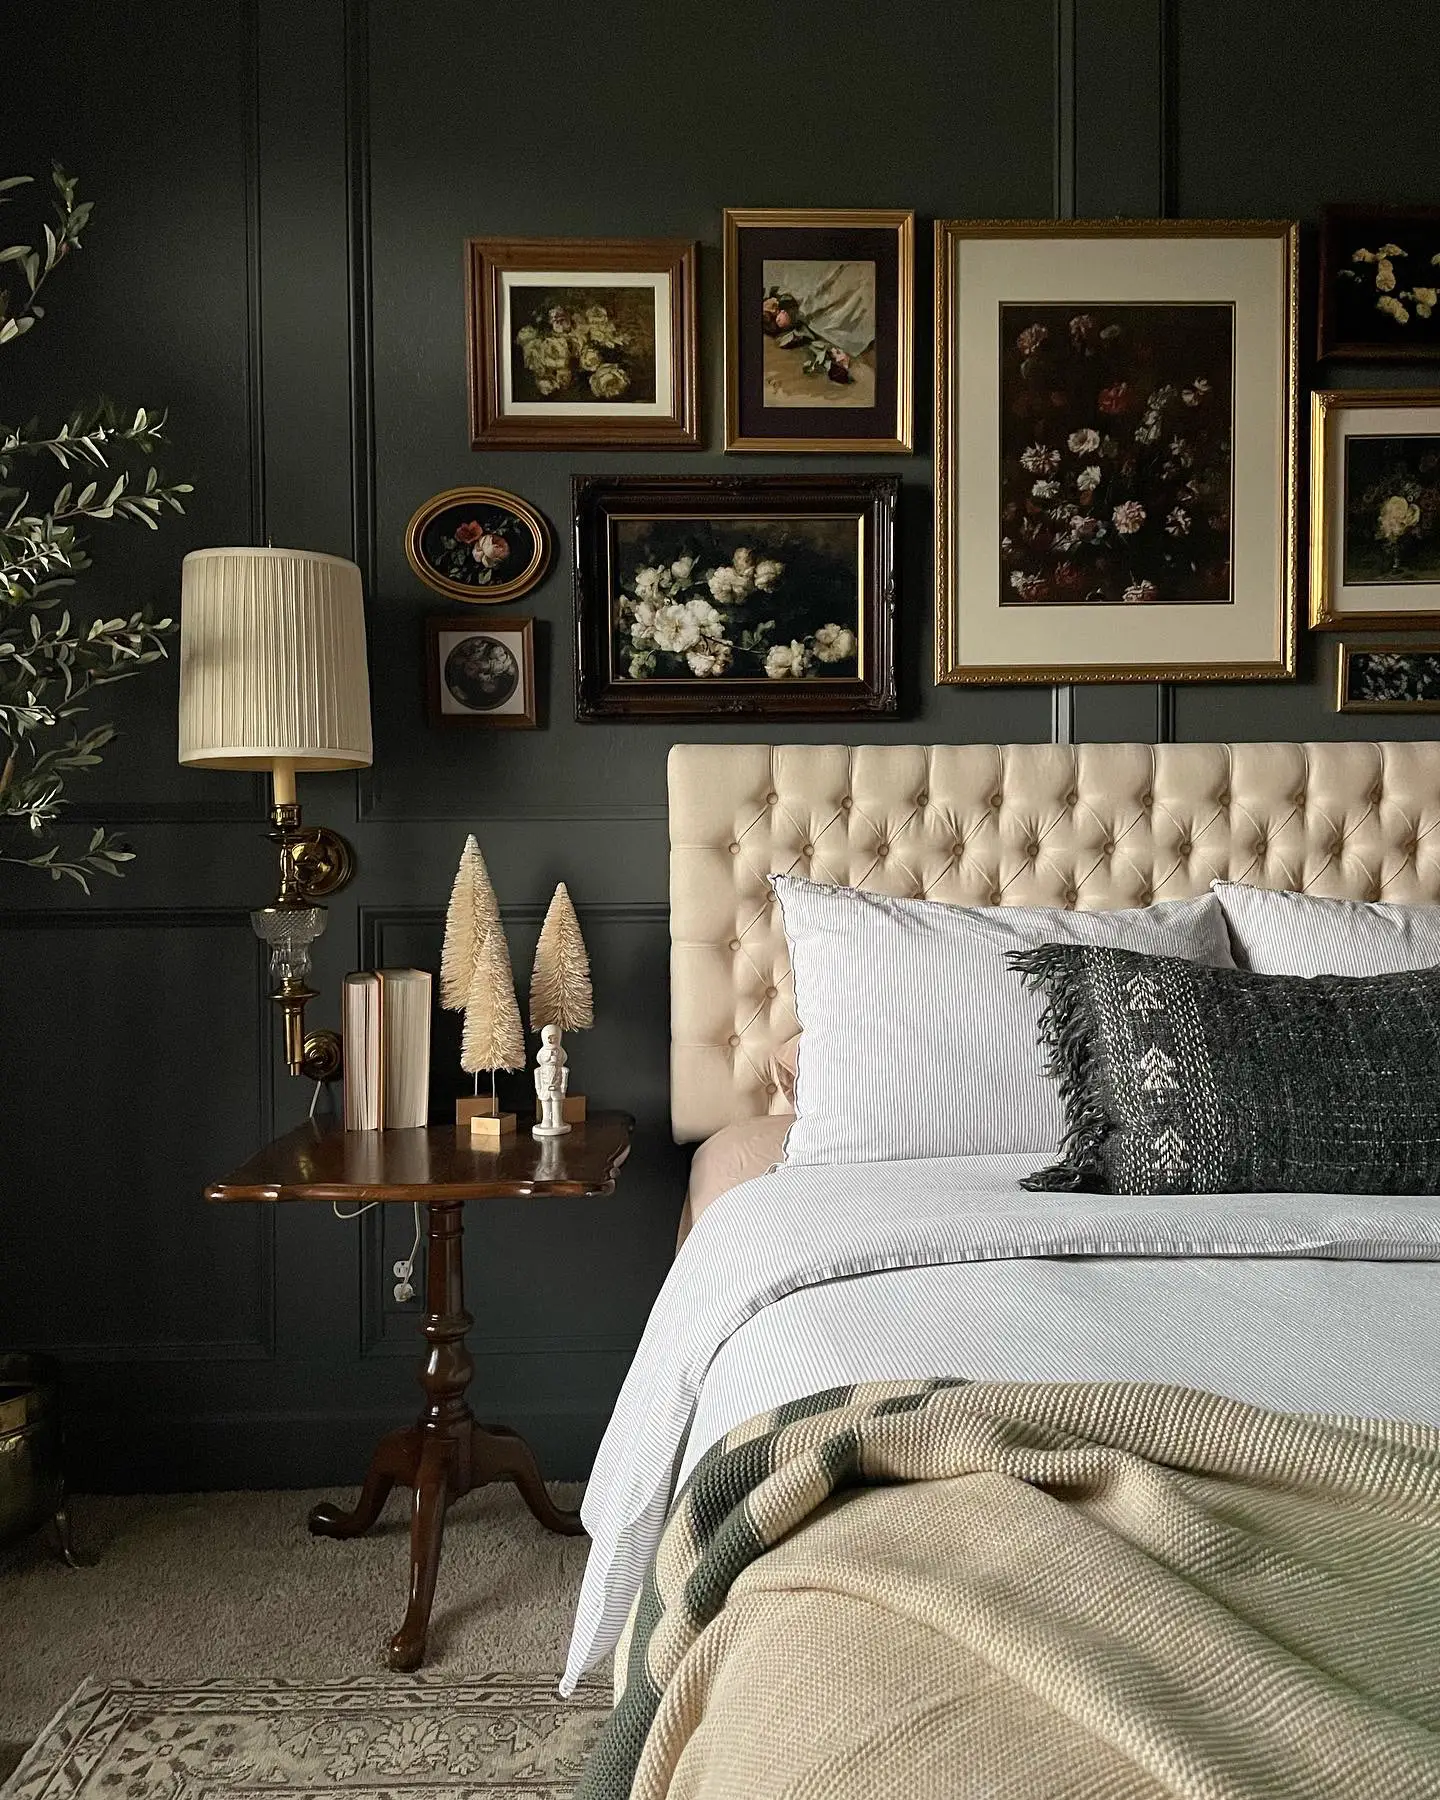 Warm tones and layers of textures 🤎✨ This tranquil bedroom features our  Limewash Paint on the walls and ceiling in color Soft Taupe